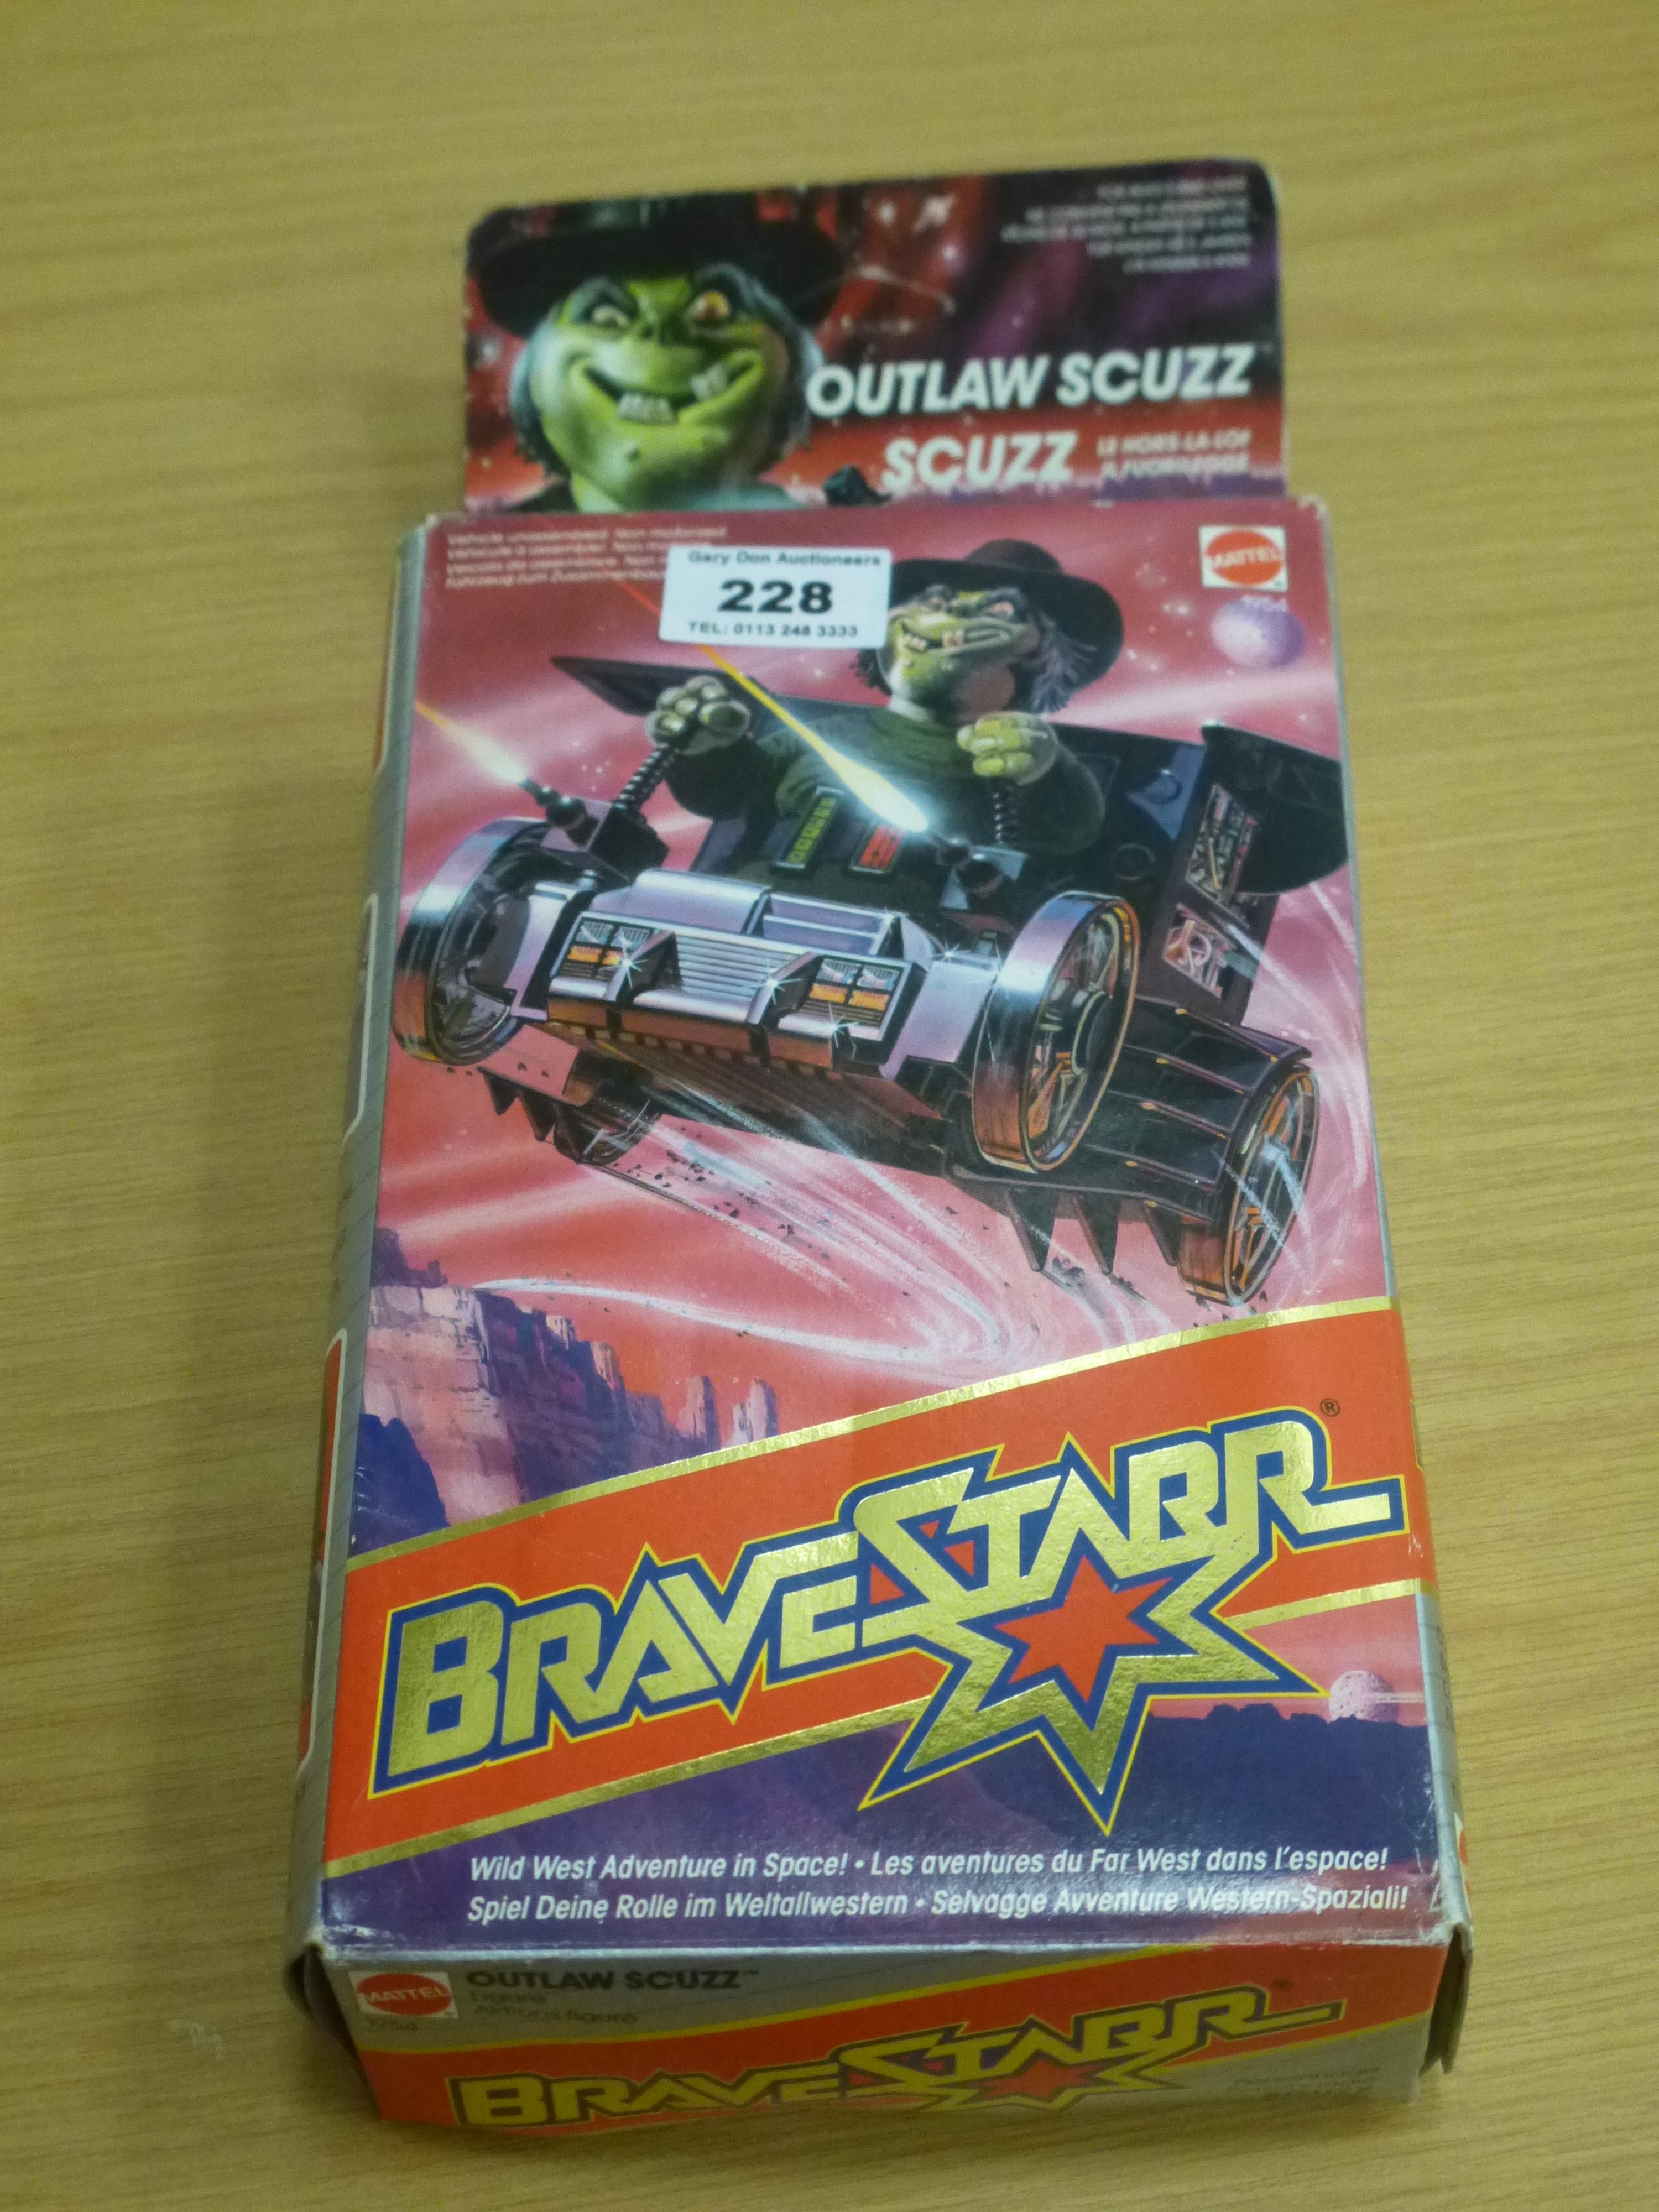 BOXED BRAVESTARR OUTLAW SCUZZ SCUZZ FIGURE